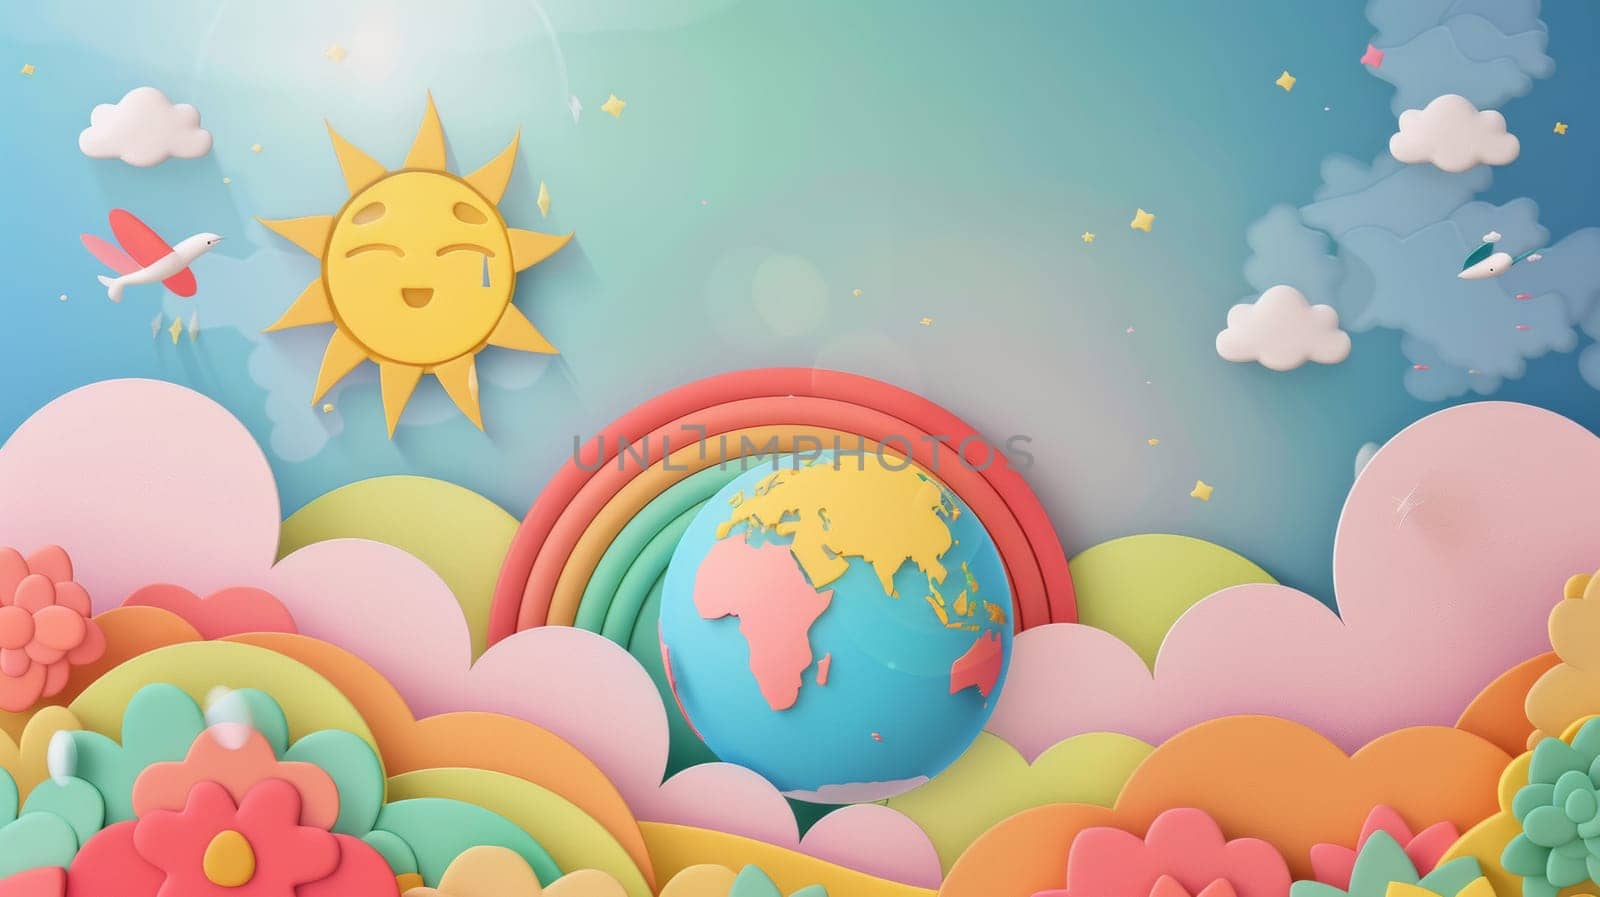 Earth Day concept background modern with globe, sun, cloud, rainbow. Eco friendly illustration design for newsletters, banners, campaigns, social media posts.